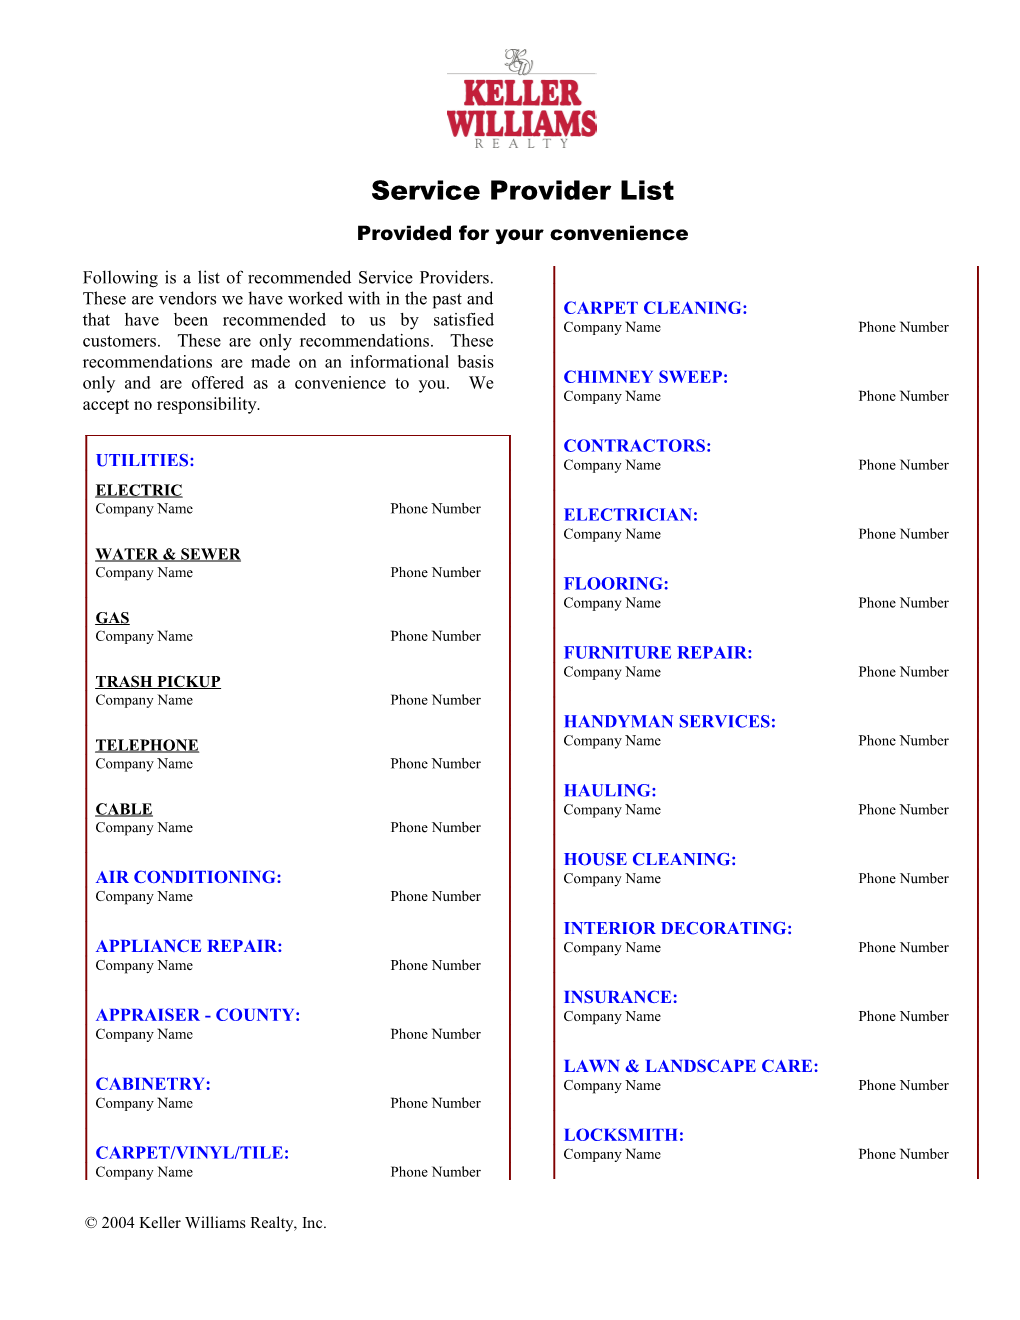 Following Is a List of Recommended Service Providers